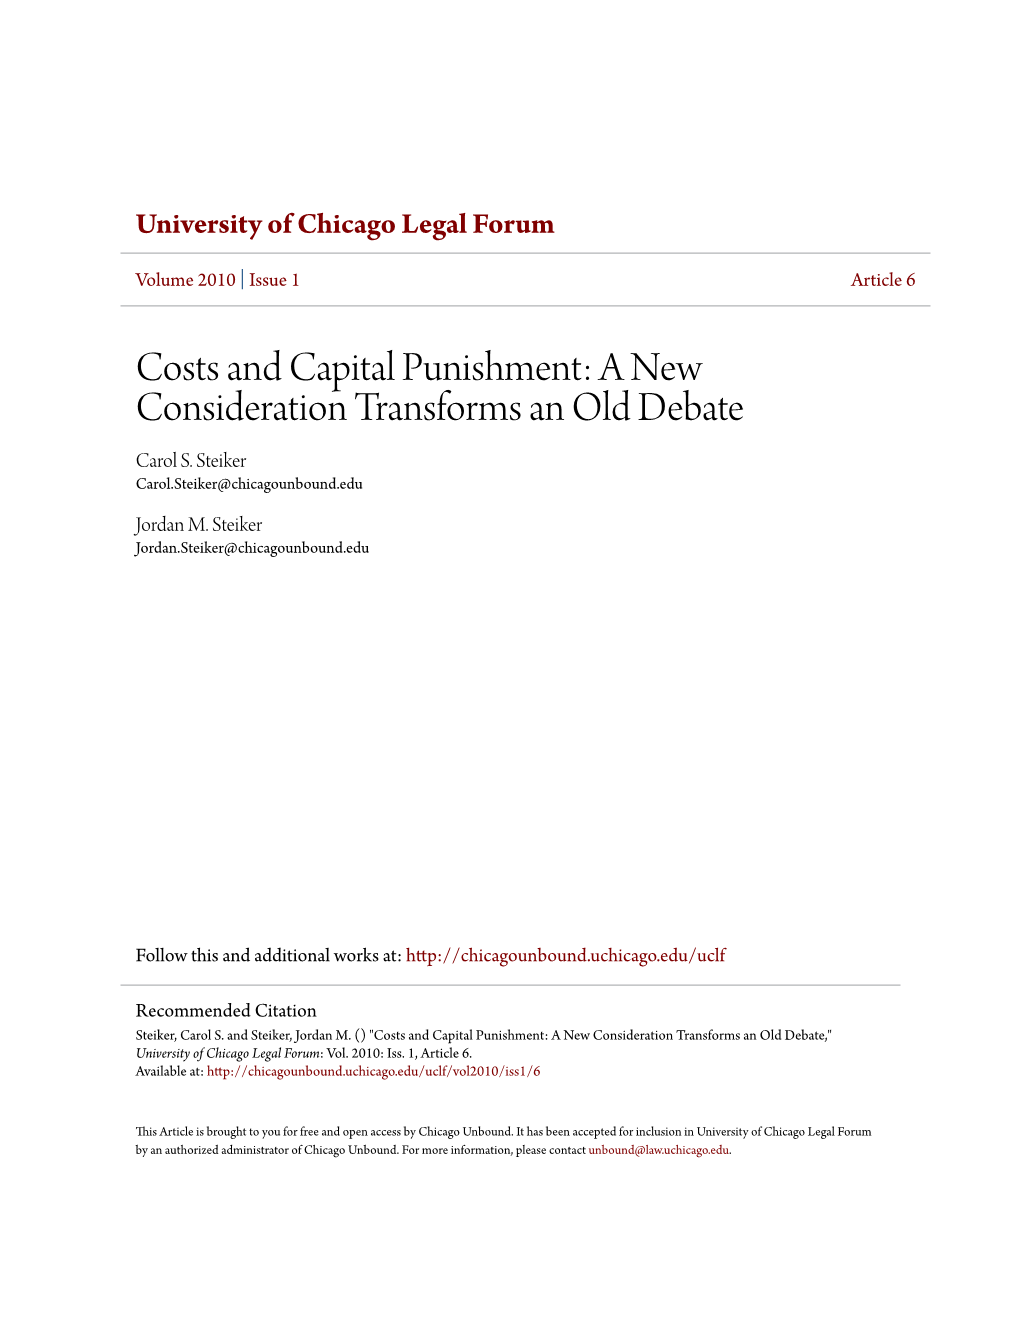 Costs and Capital Punishment: a New Consideration Transforms an Old Debate Carol S